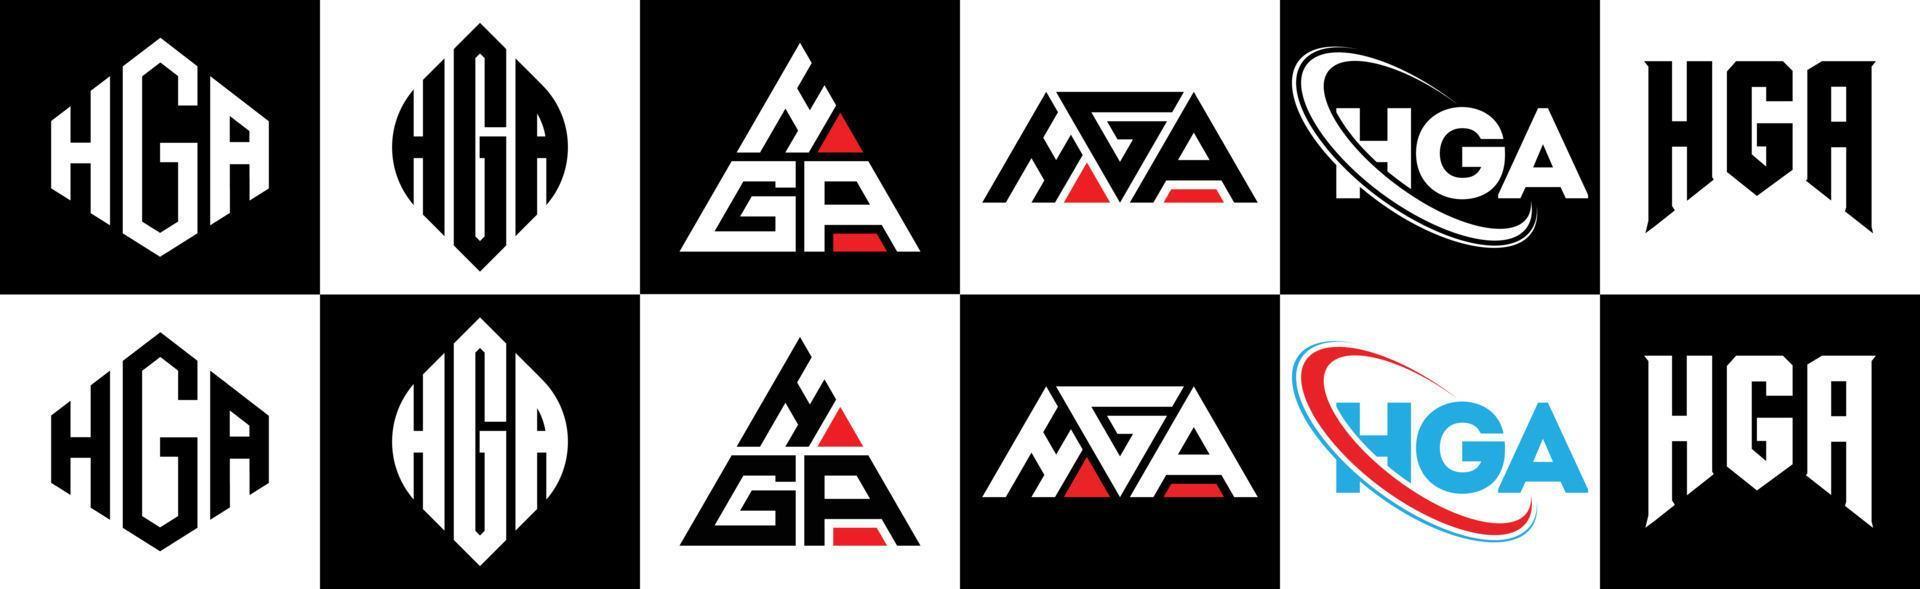 HGA letter logo design in six style. HGA polygon, circle, triangle, hexagon, flat and simple style with black and white color variation letter logo set in one artboard. HGA minimalist and classic logo vector